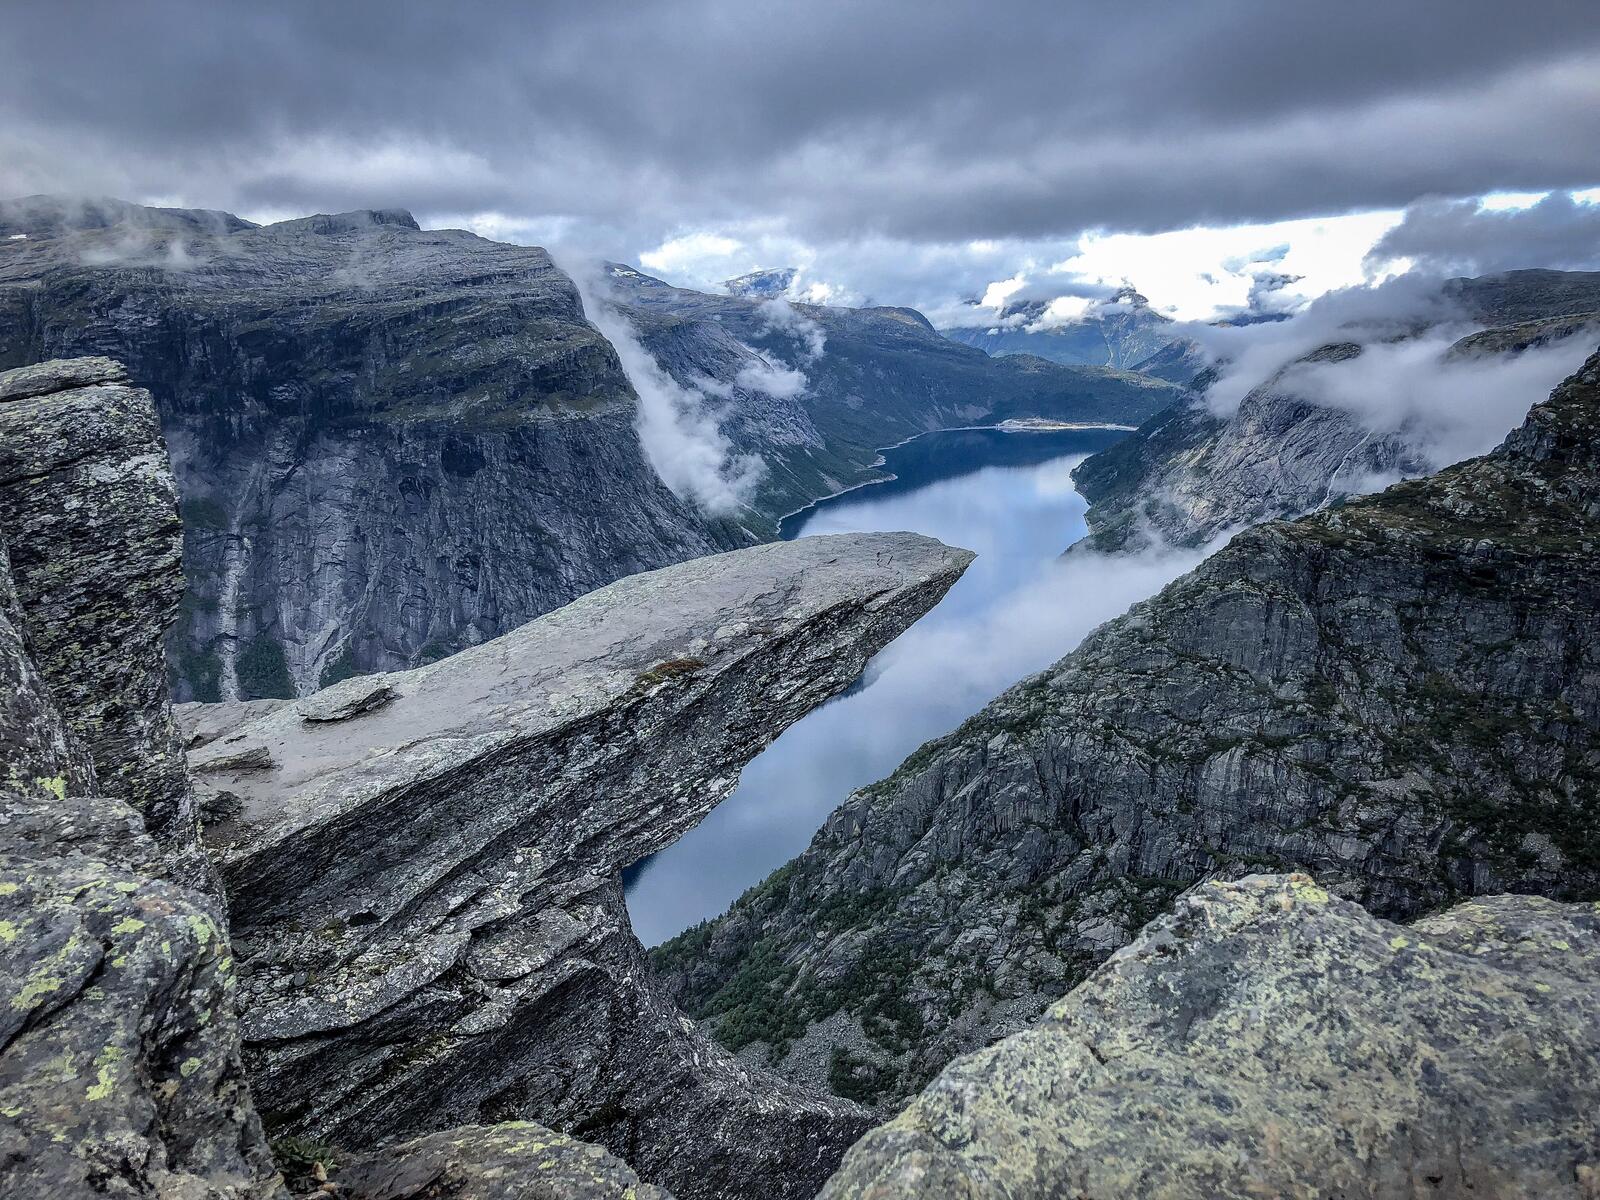 Wallpapers The Troll s tongue Trolltunga Norway on the desktop